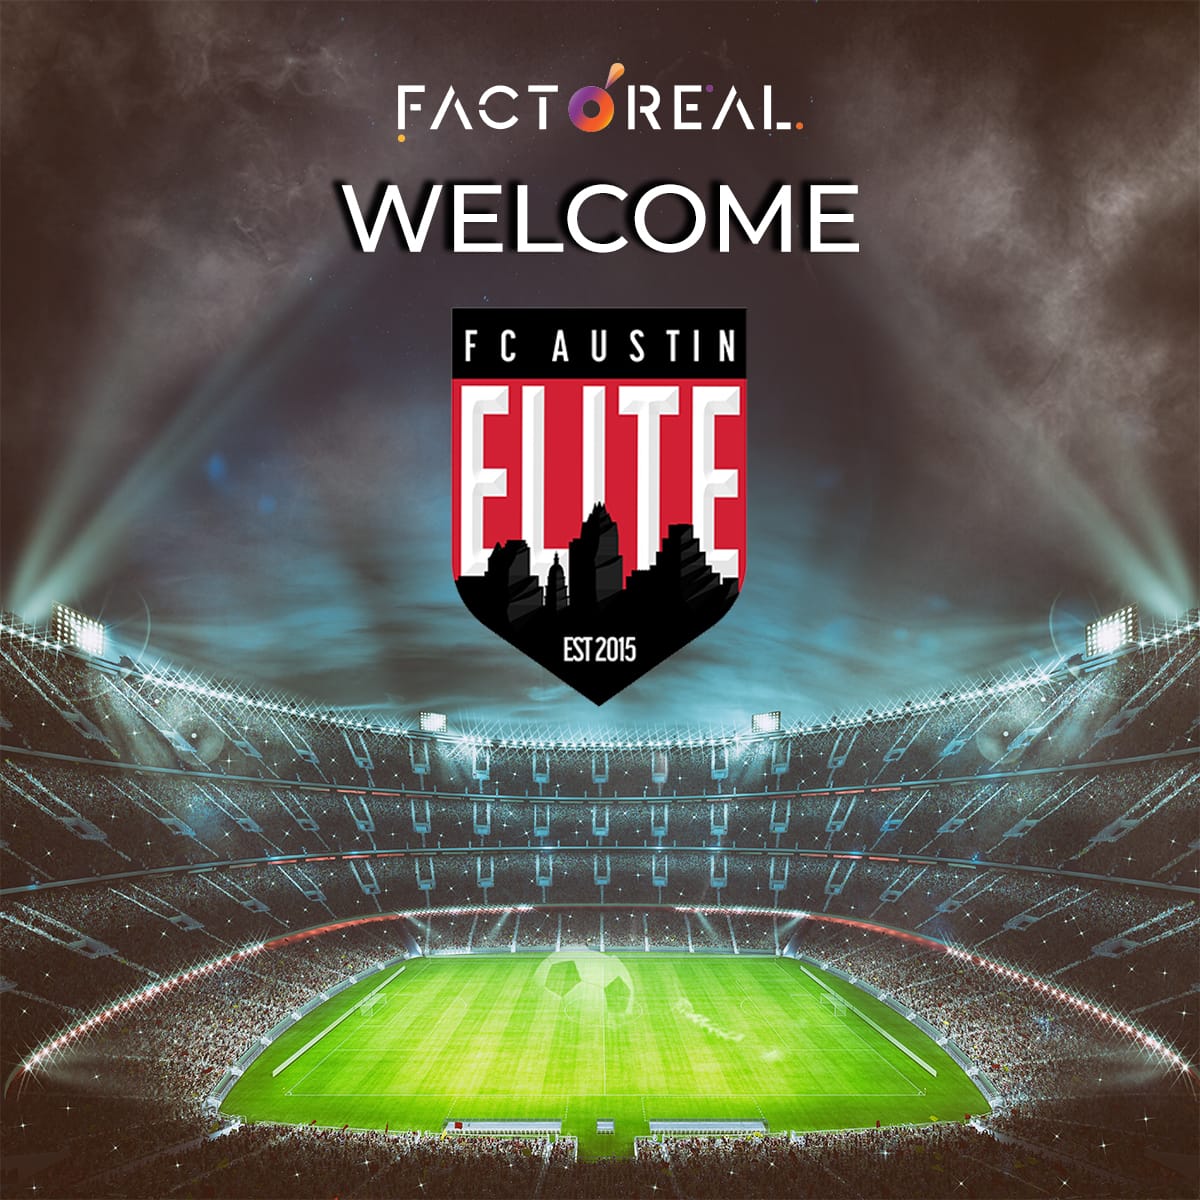 Factoreal partners with FC Austin Elite